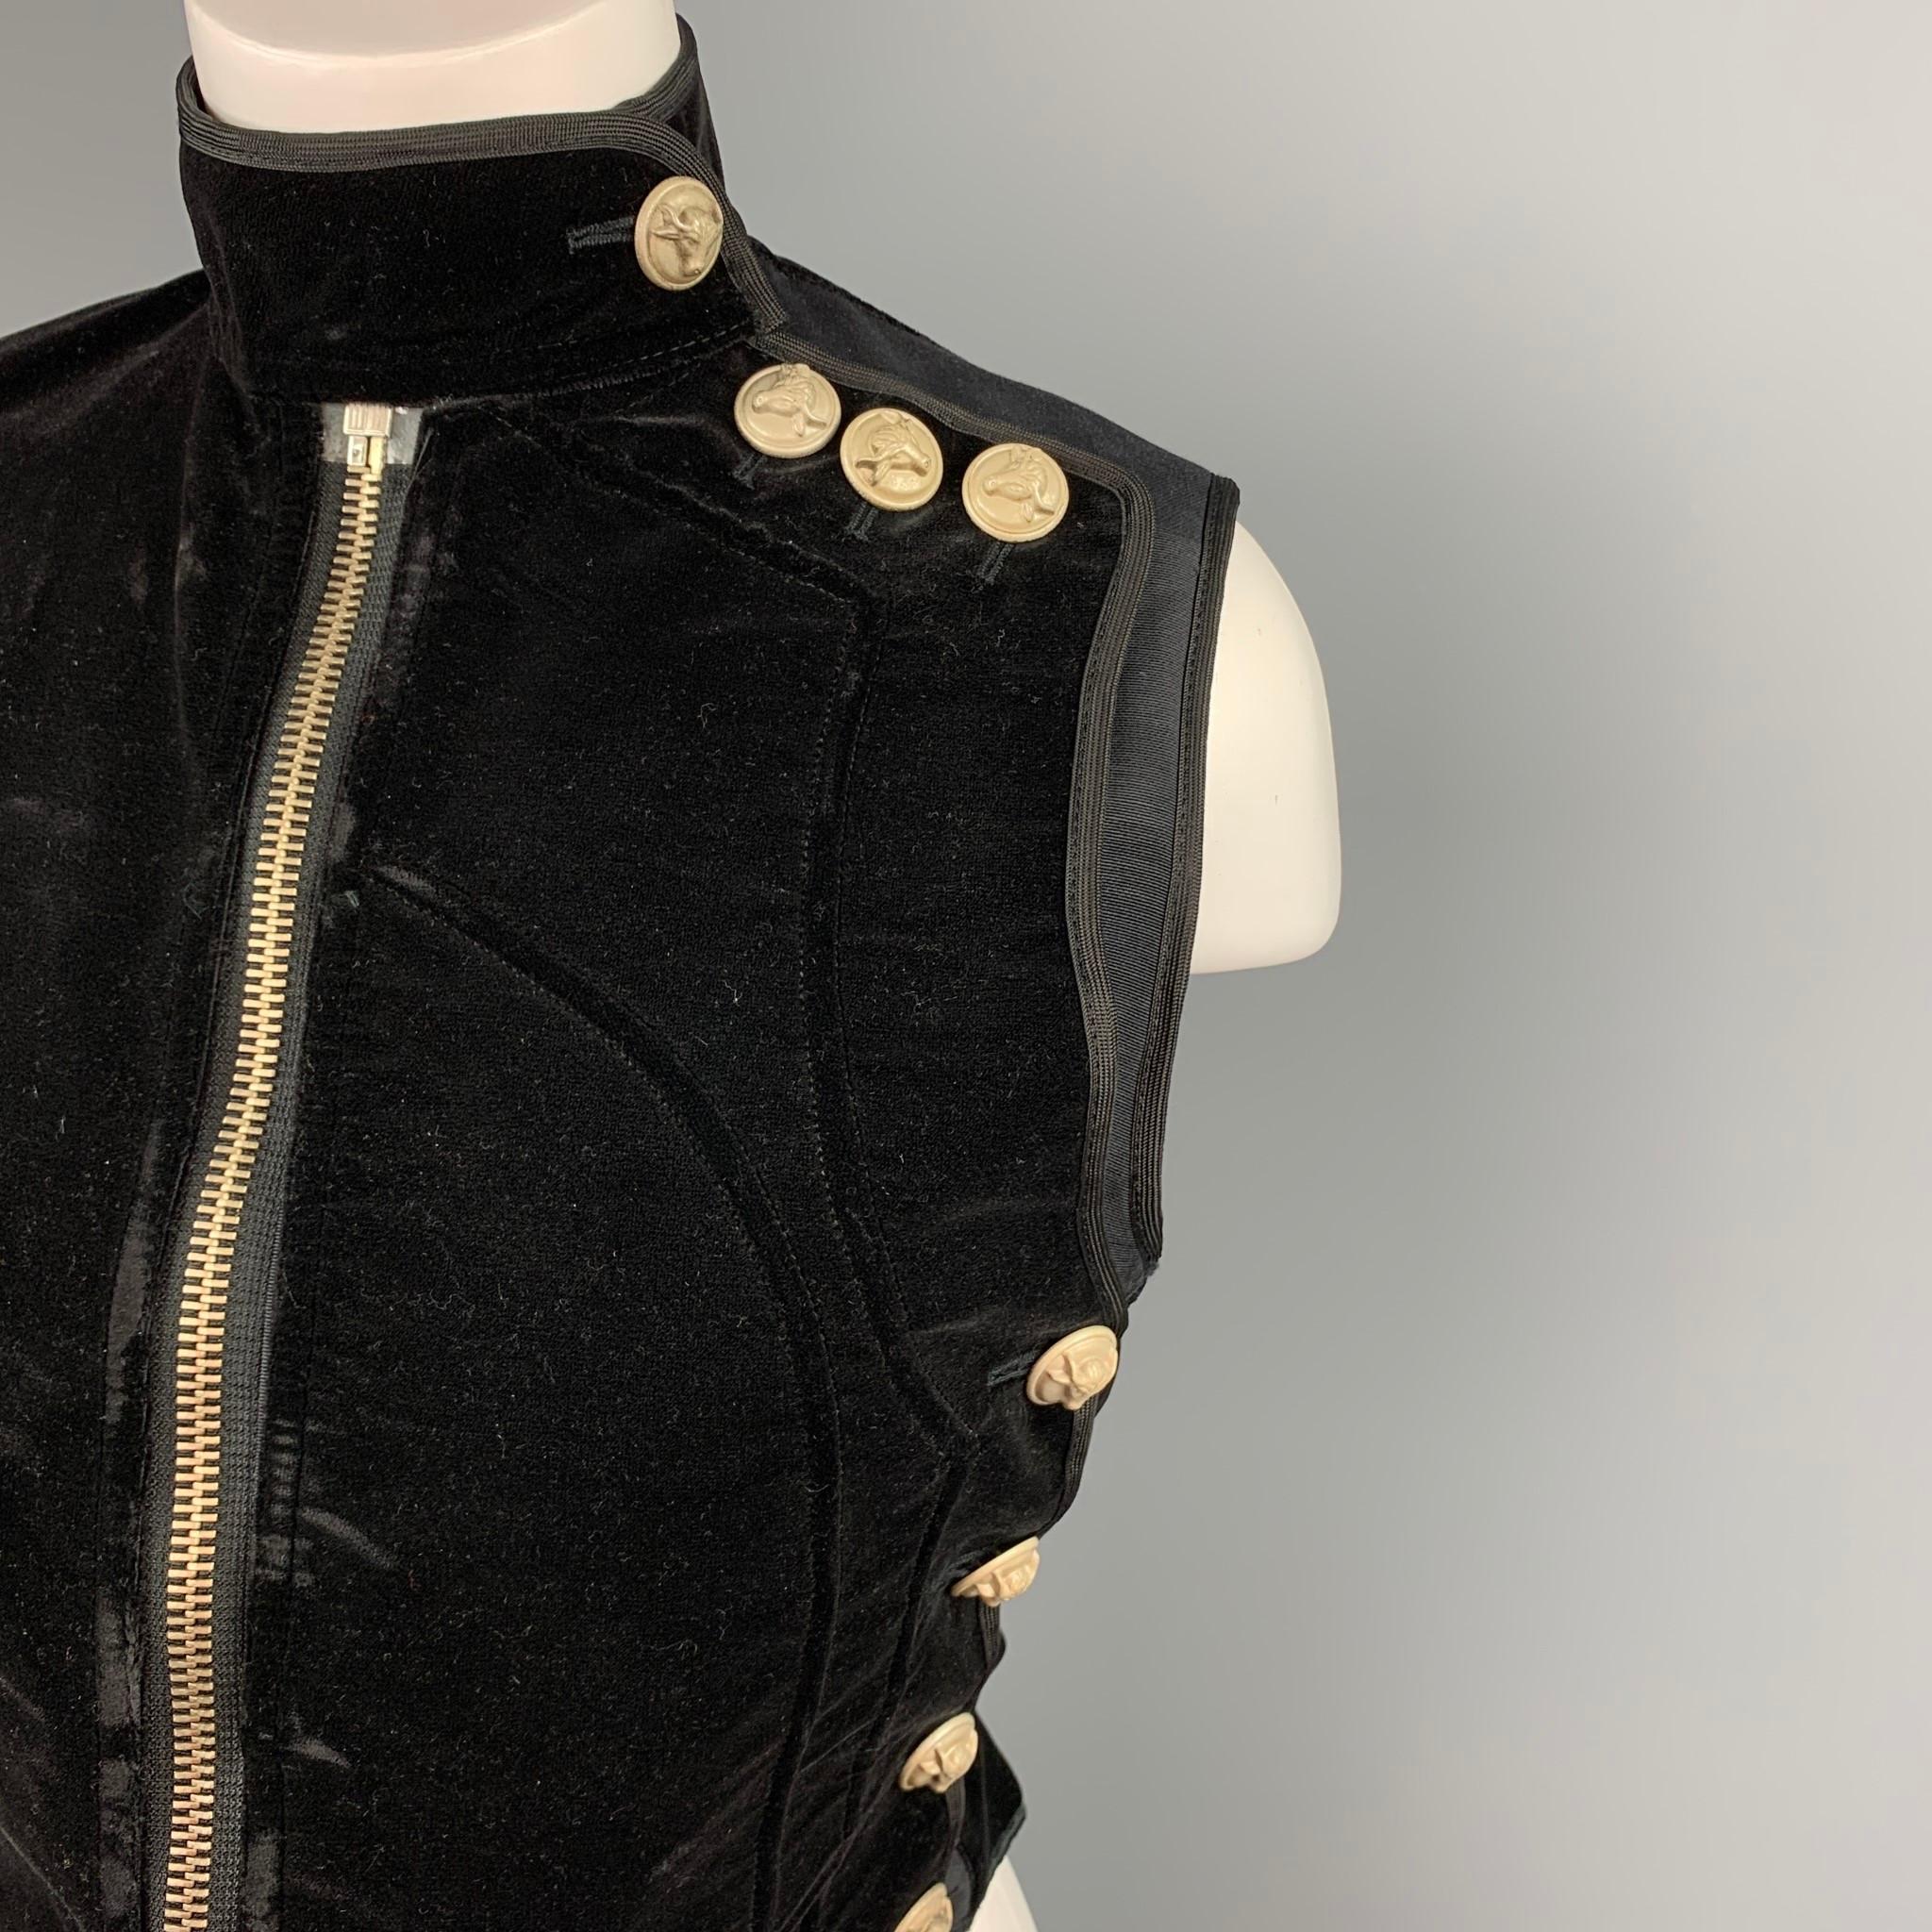 Vintage JEAN PAUL GAULTIER vest comes in a black velvet with a full liner featuring a strap collar detail, bull head buttons, back strap, and a upside down zip up closure.

Very Good Pre-Owned Condition.
Marked: IT 42

Measurements:

Shoulder: 14.5